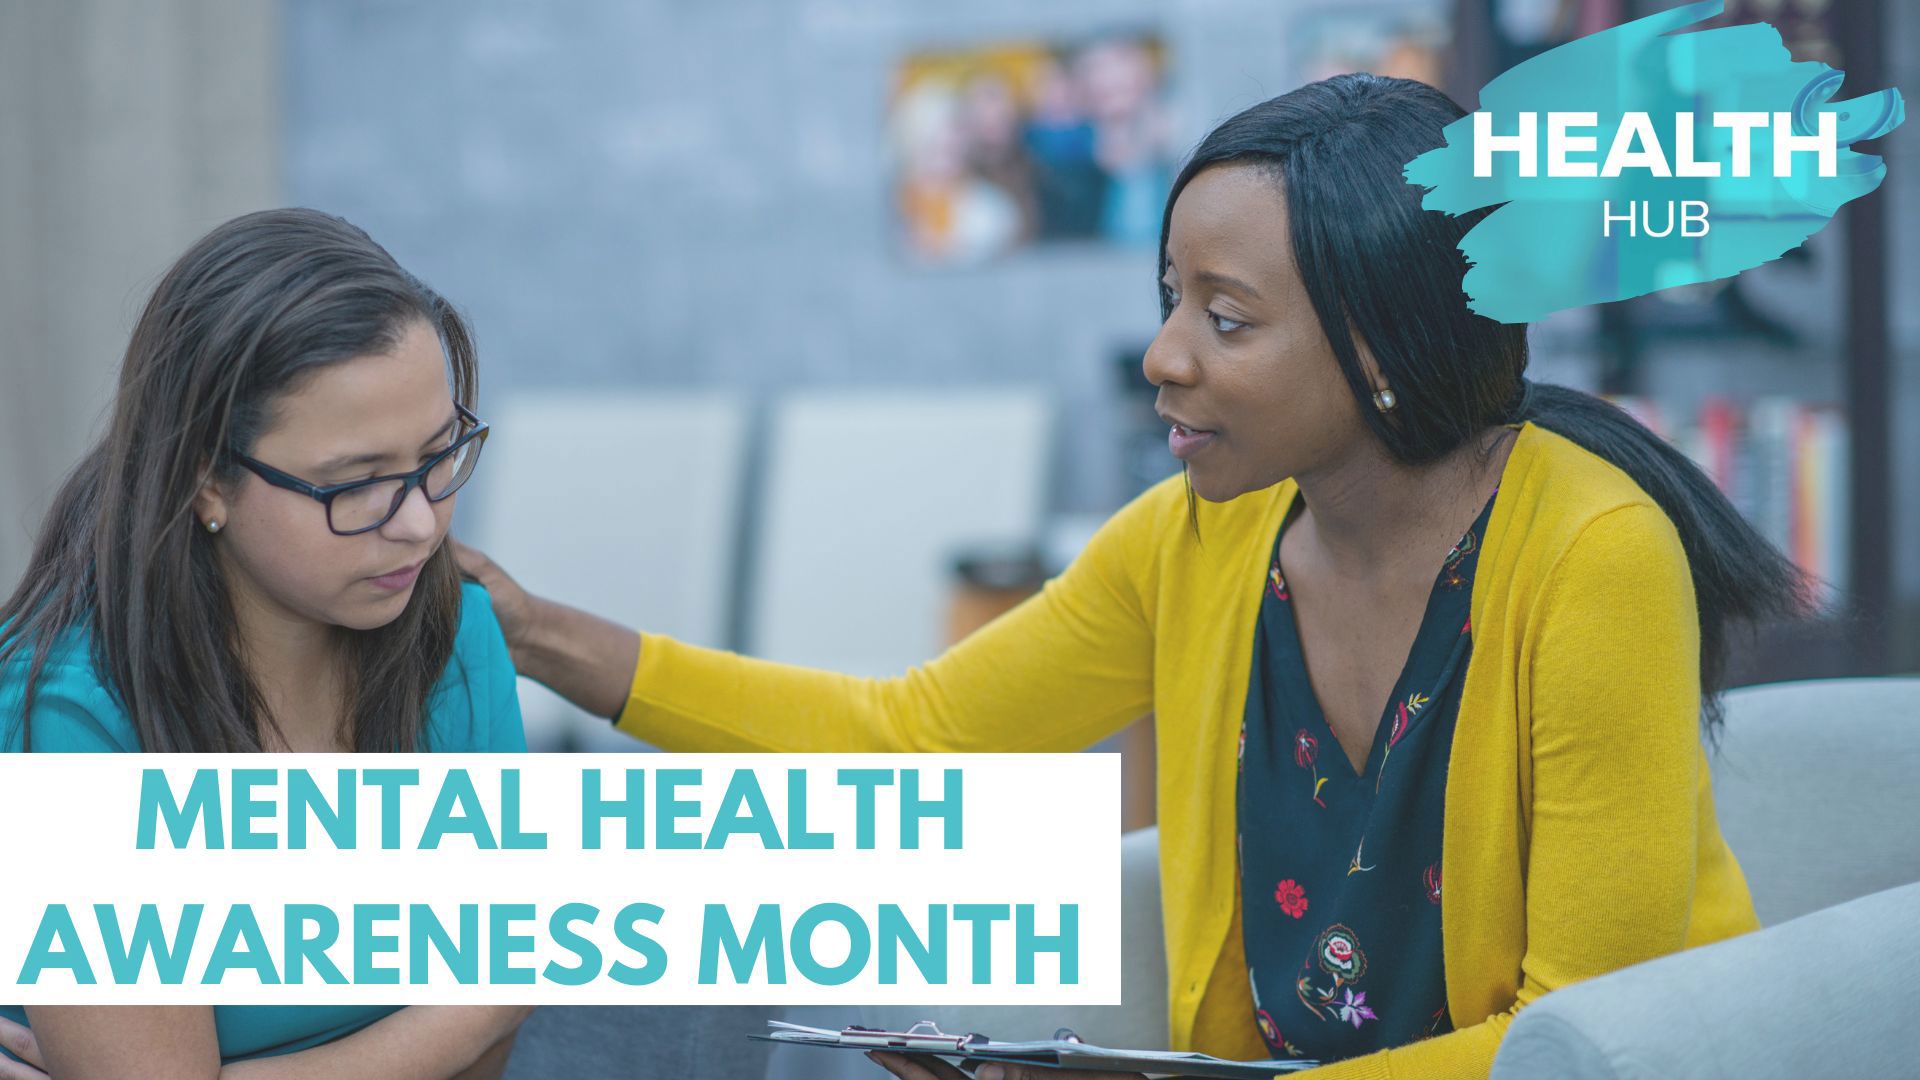 May is mental health awareness month, a time to spotlight the importance of mental health. We help break down stigma, share tools to help and raise awareness.